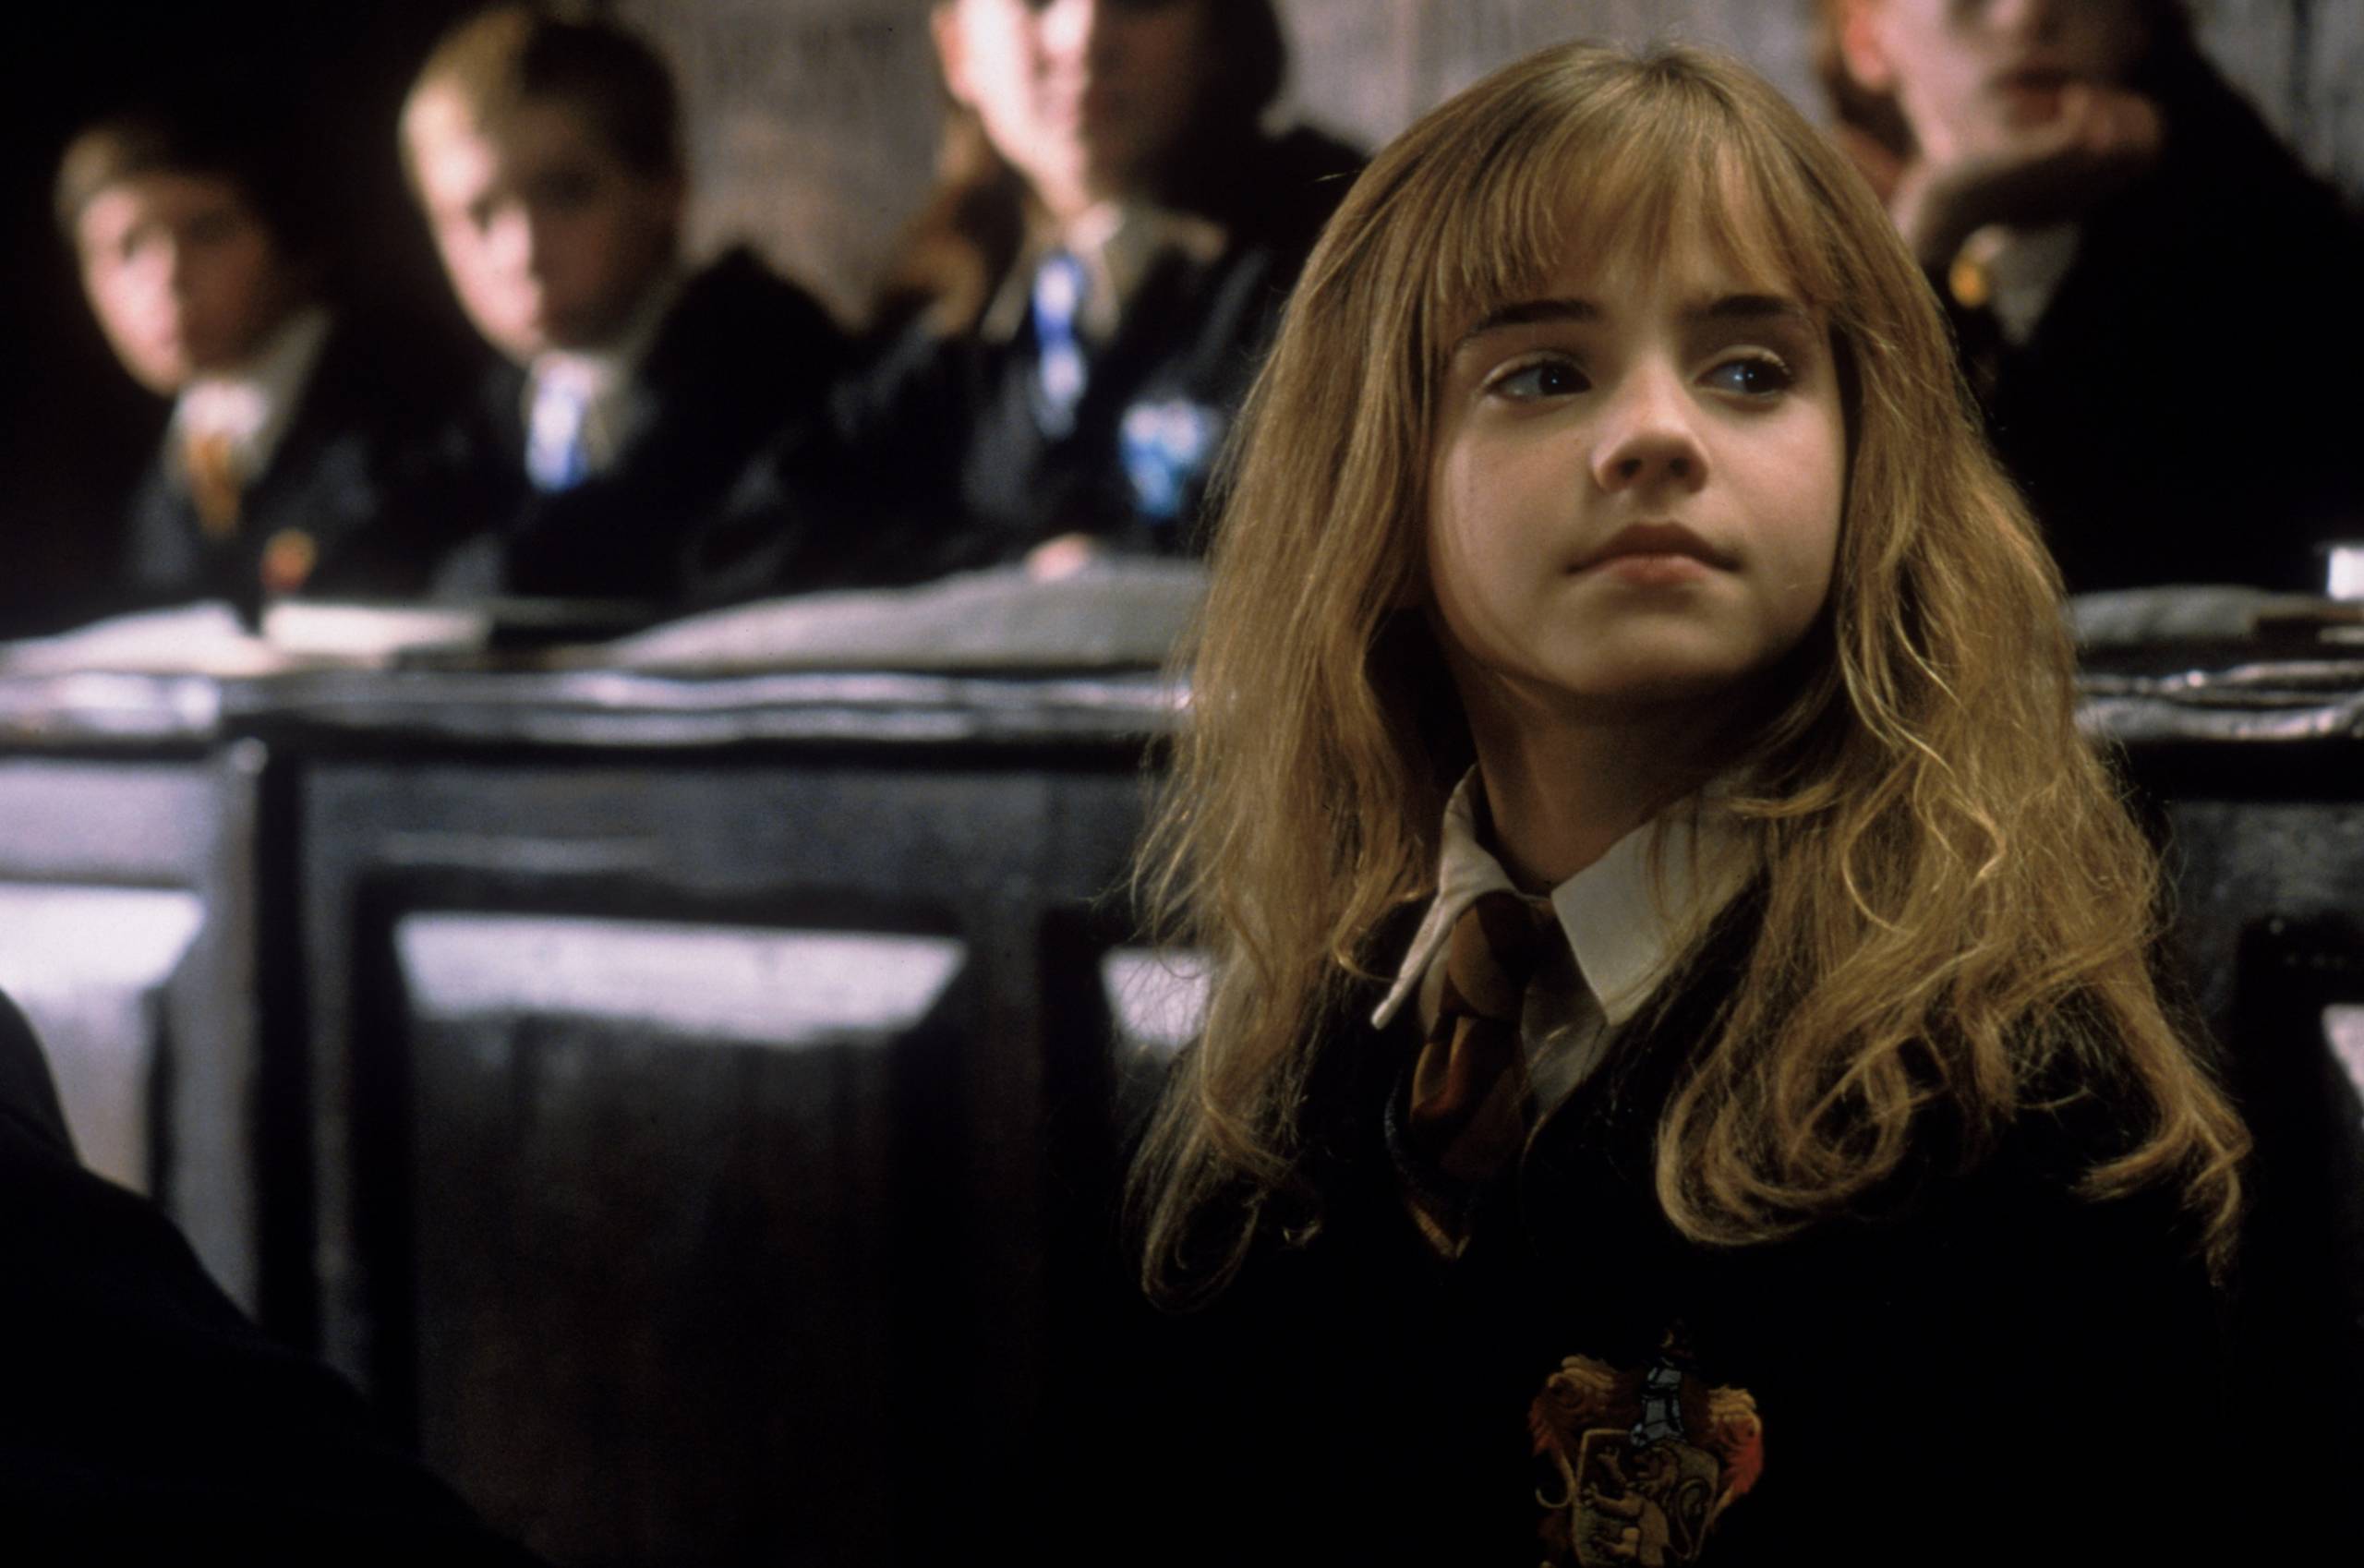 WB-HP1-F1-hermione-in-class-philosophers-stone